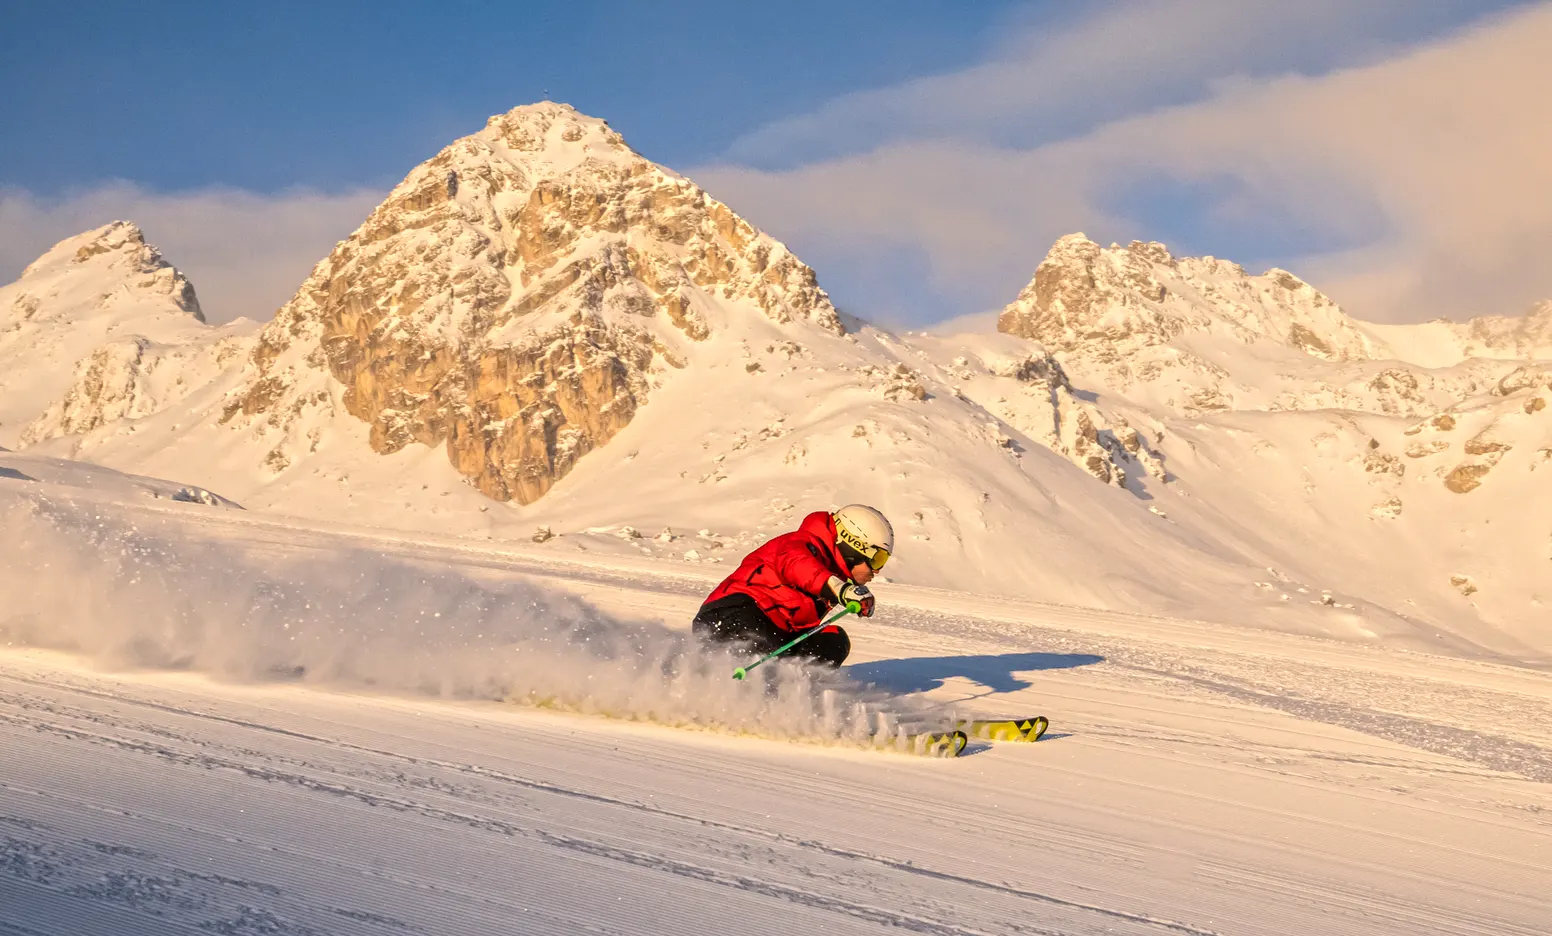 Carving the early mornings in St Moritz Corviglia